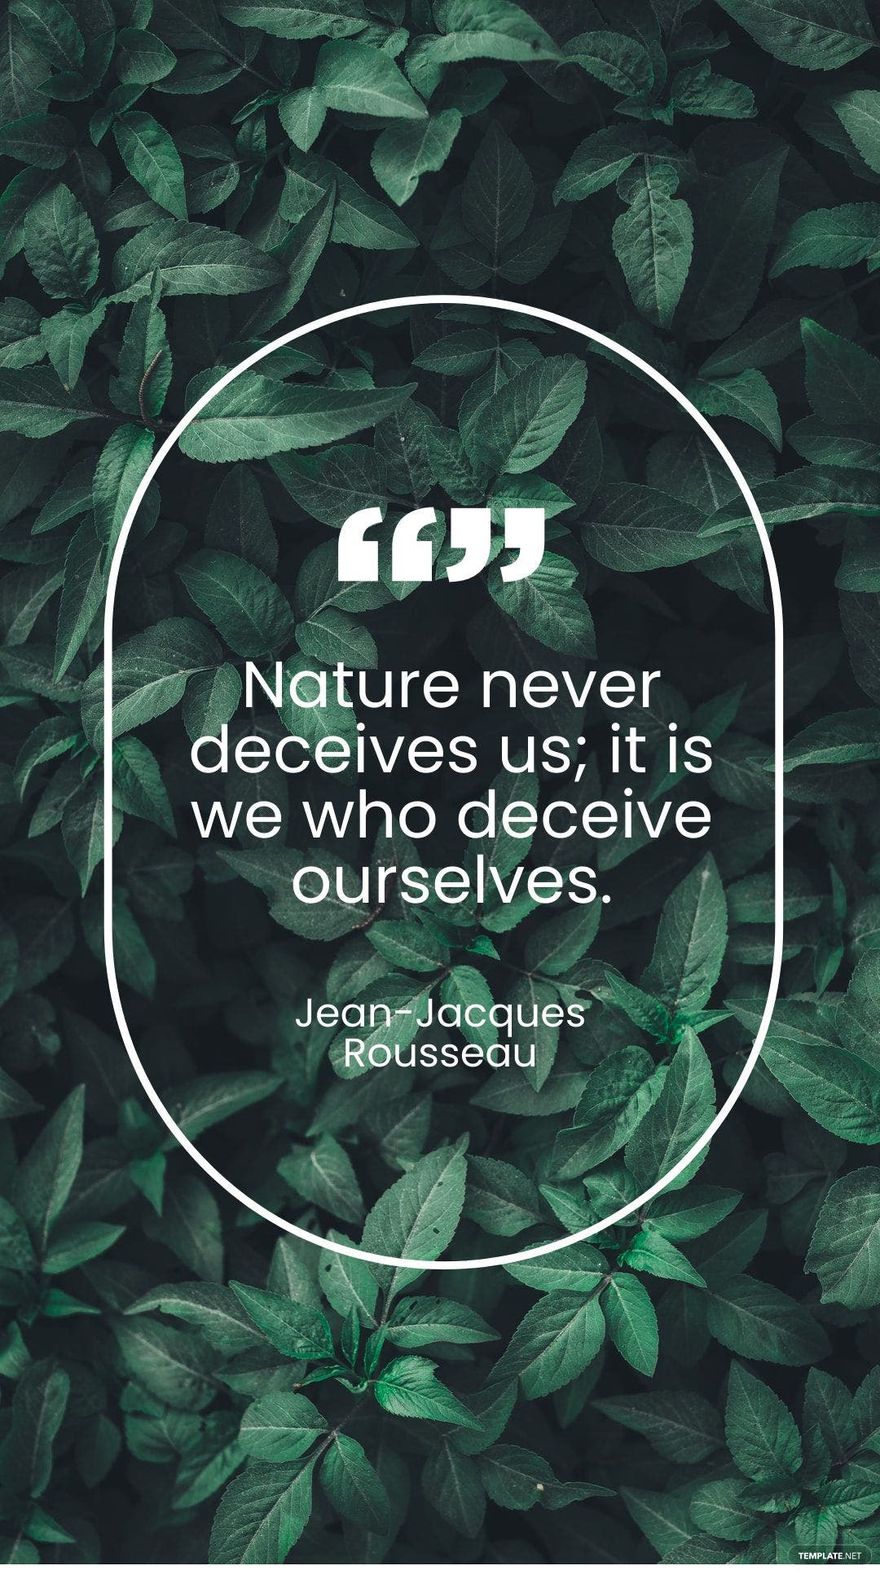 Jean-Jacques Rousseau - Nature never deceives us; it is we who deceive ourselves.